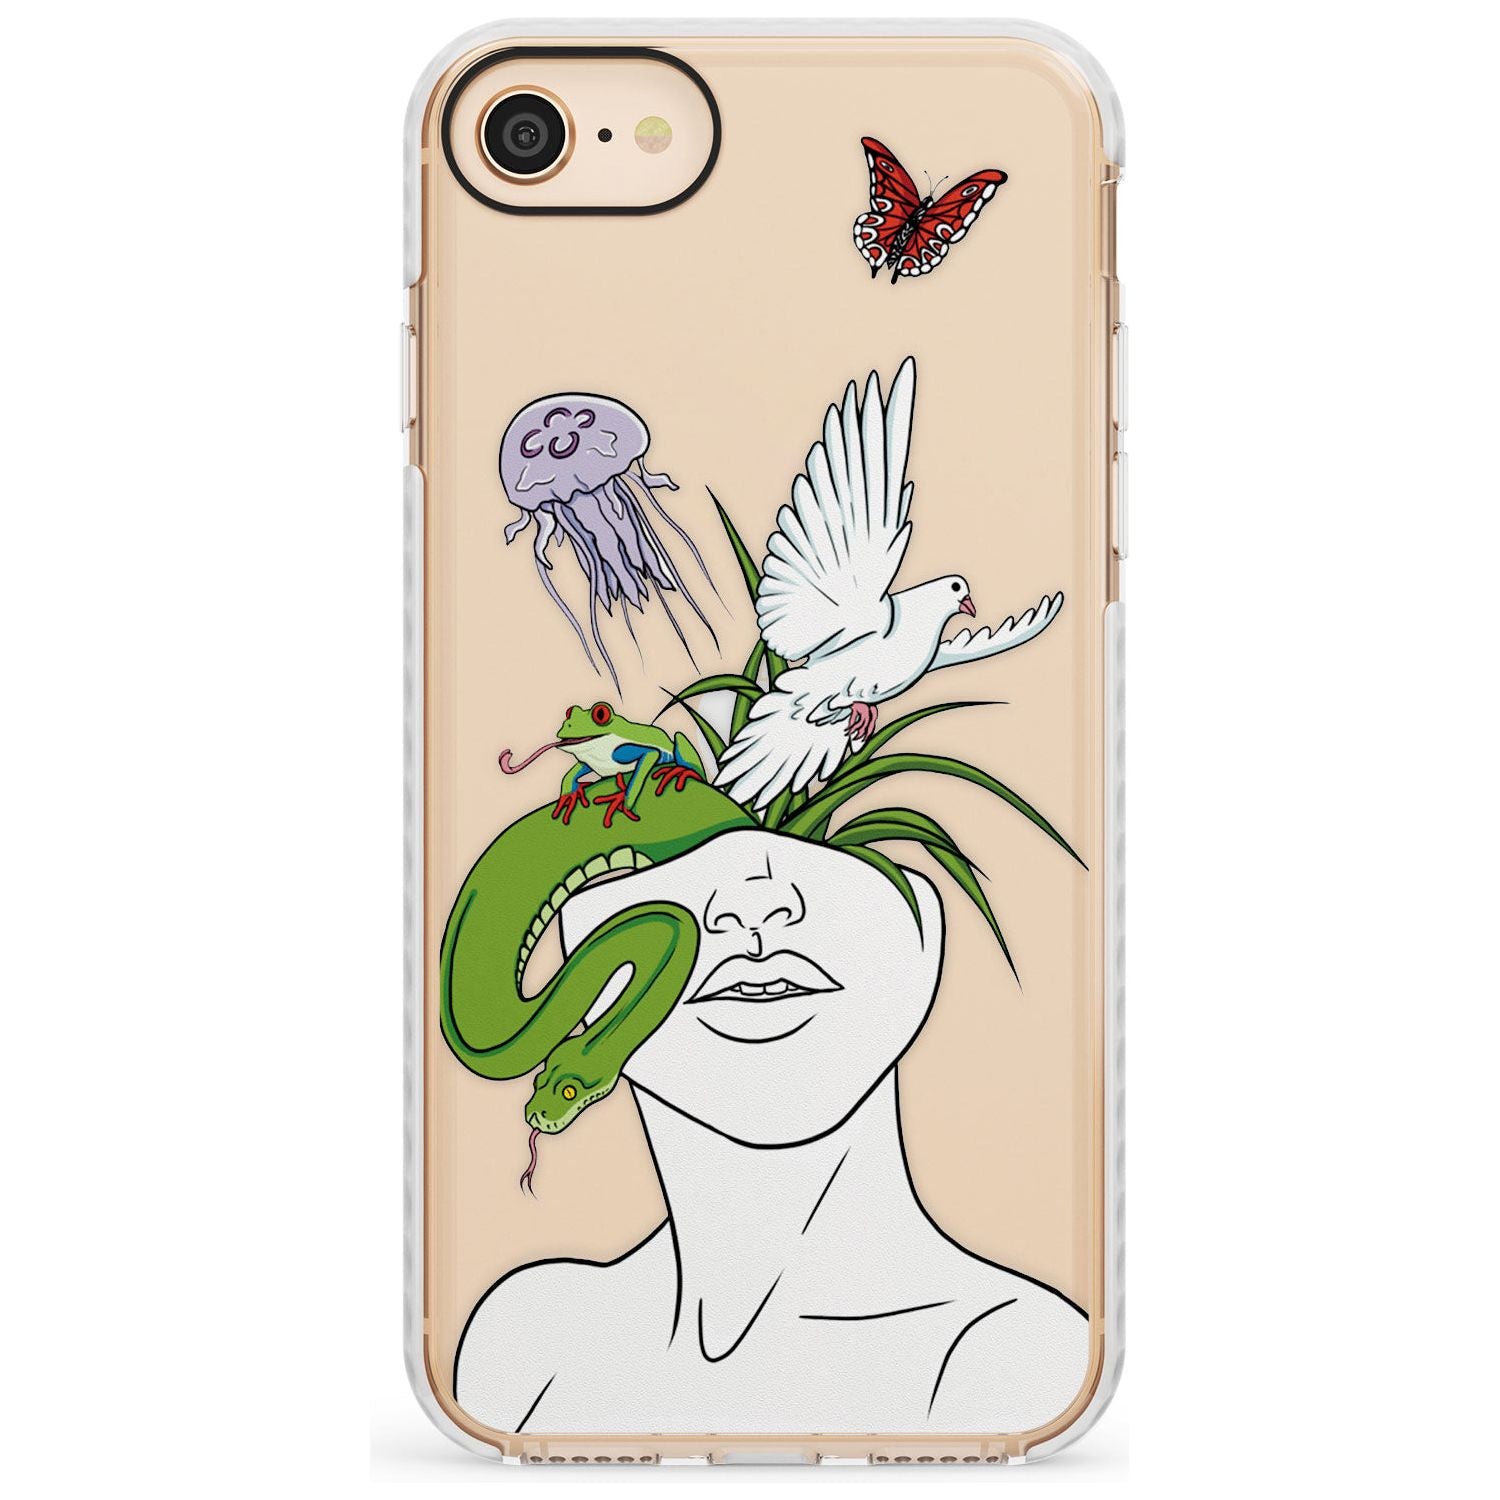 WILD THOUGHTS Slim TPU Phone Case for iPhone SE 8 7 Plus